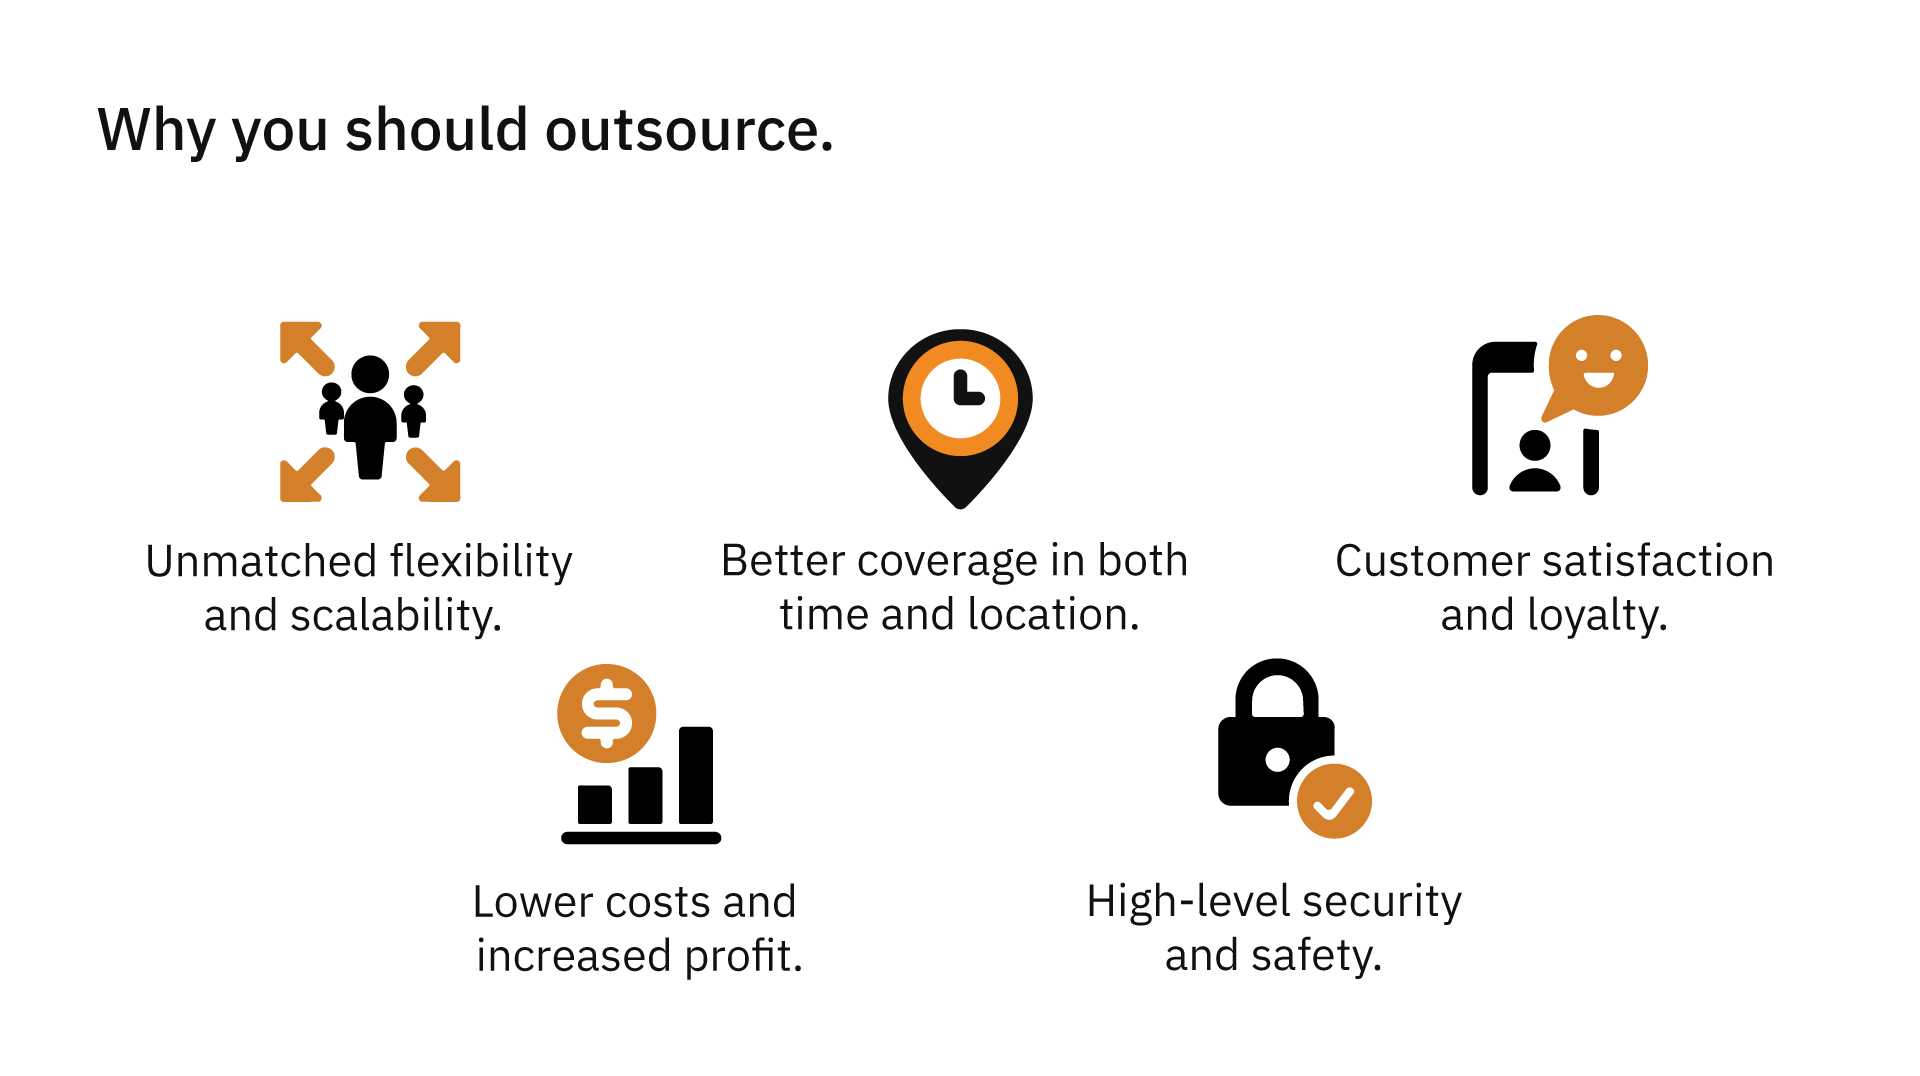 Reasons to offshore outsource your operations